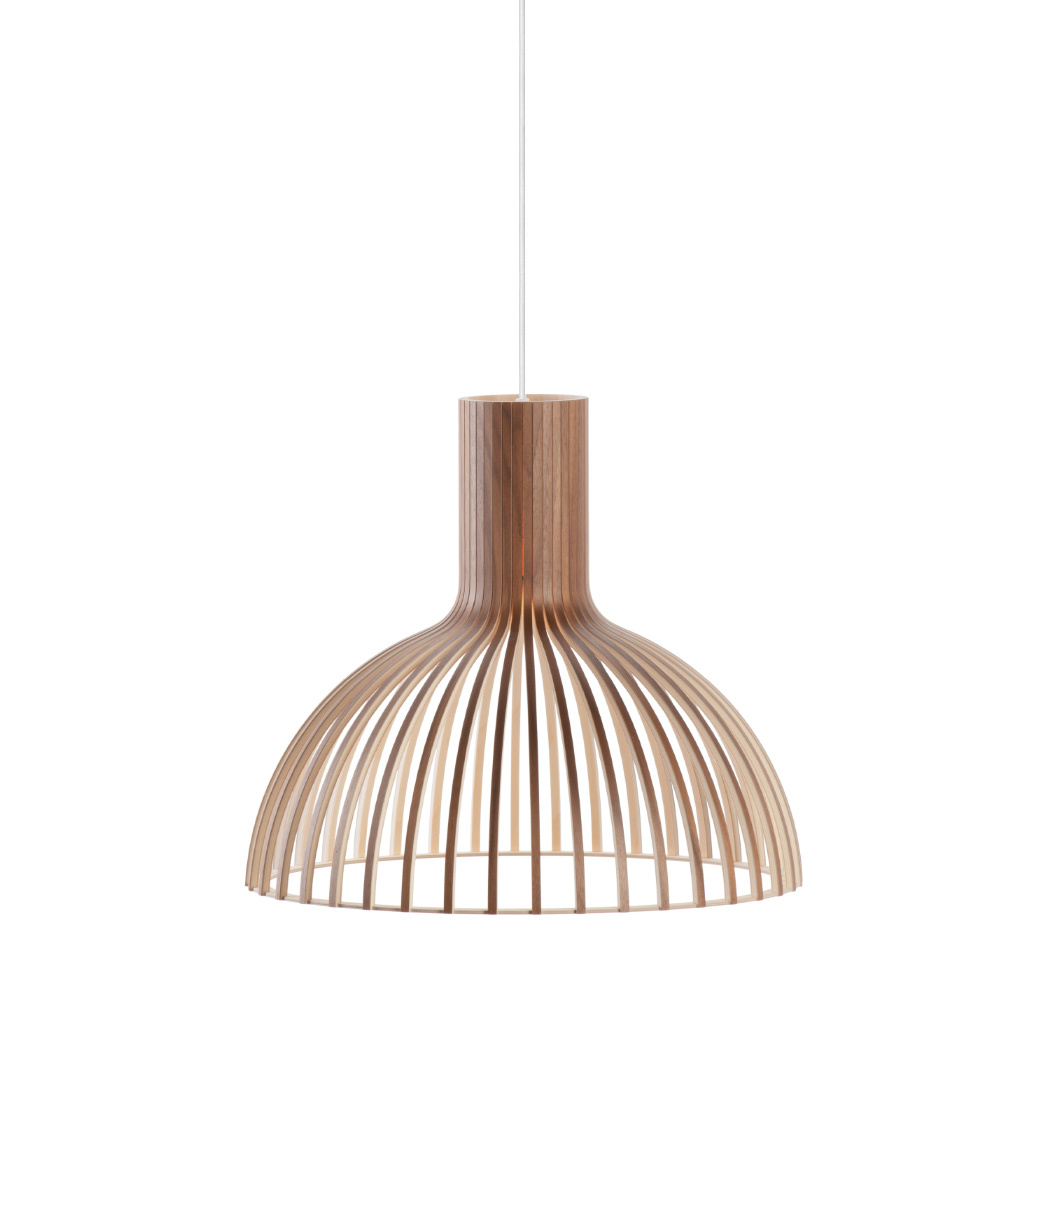 Victo Small 4251 pendant lamp  is available in walnut veneer